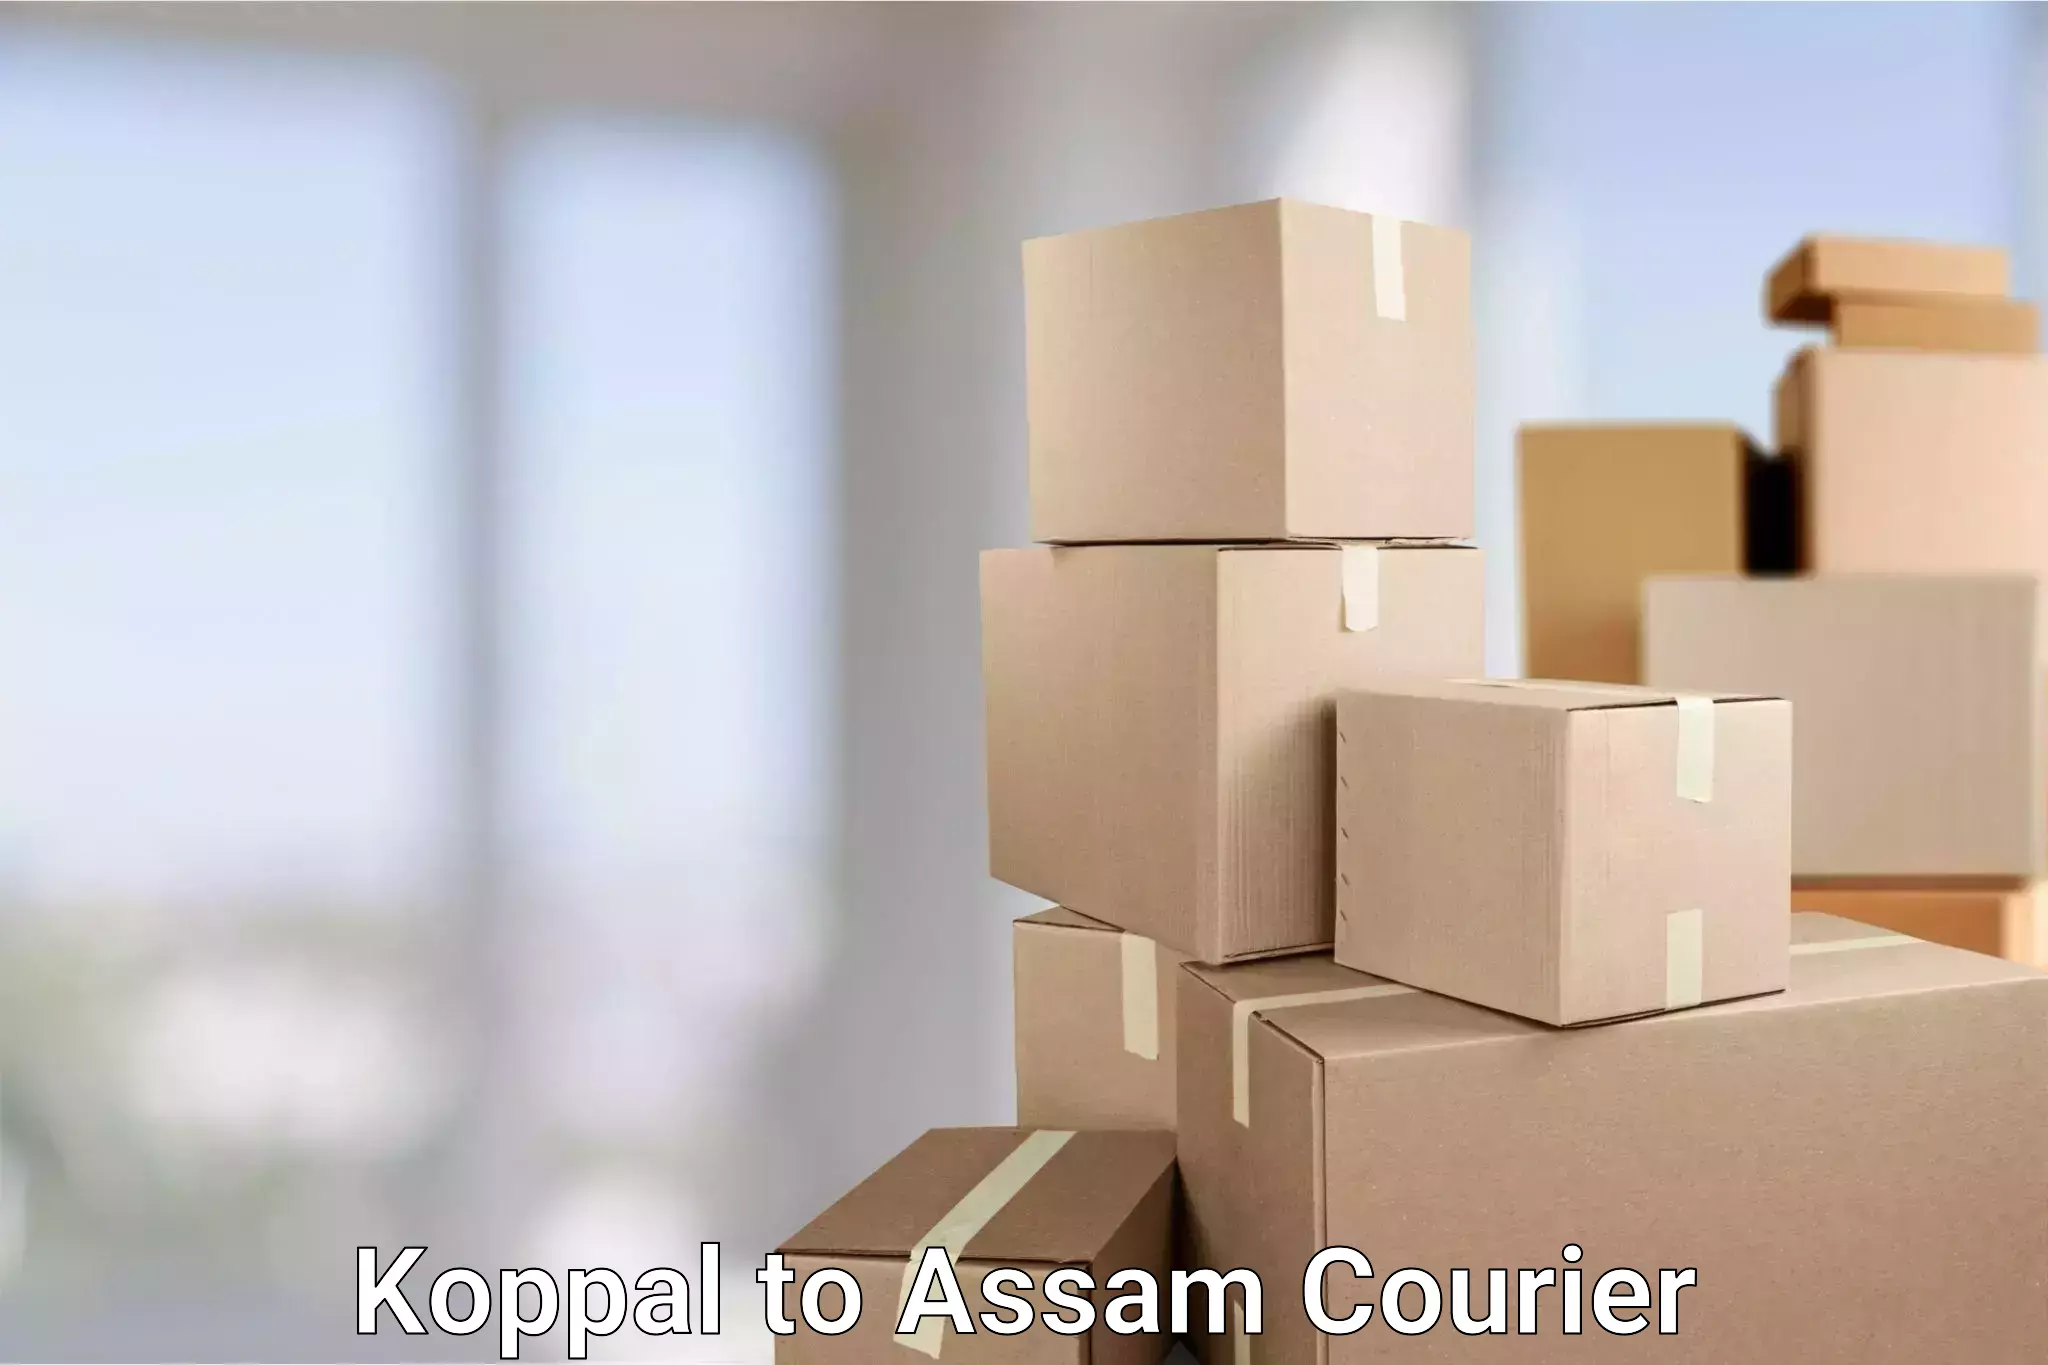 Courier service efficiency Koppal to Mayang